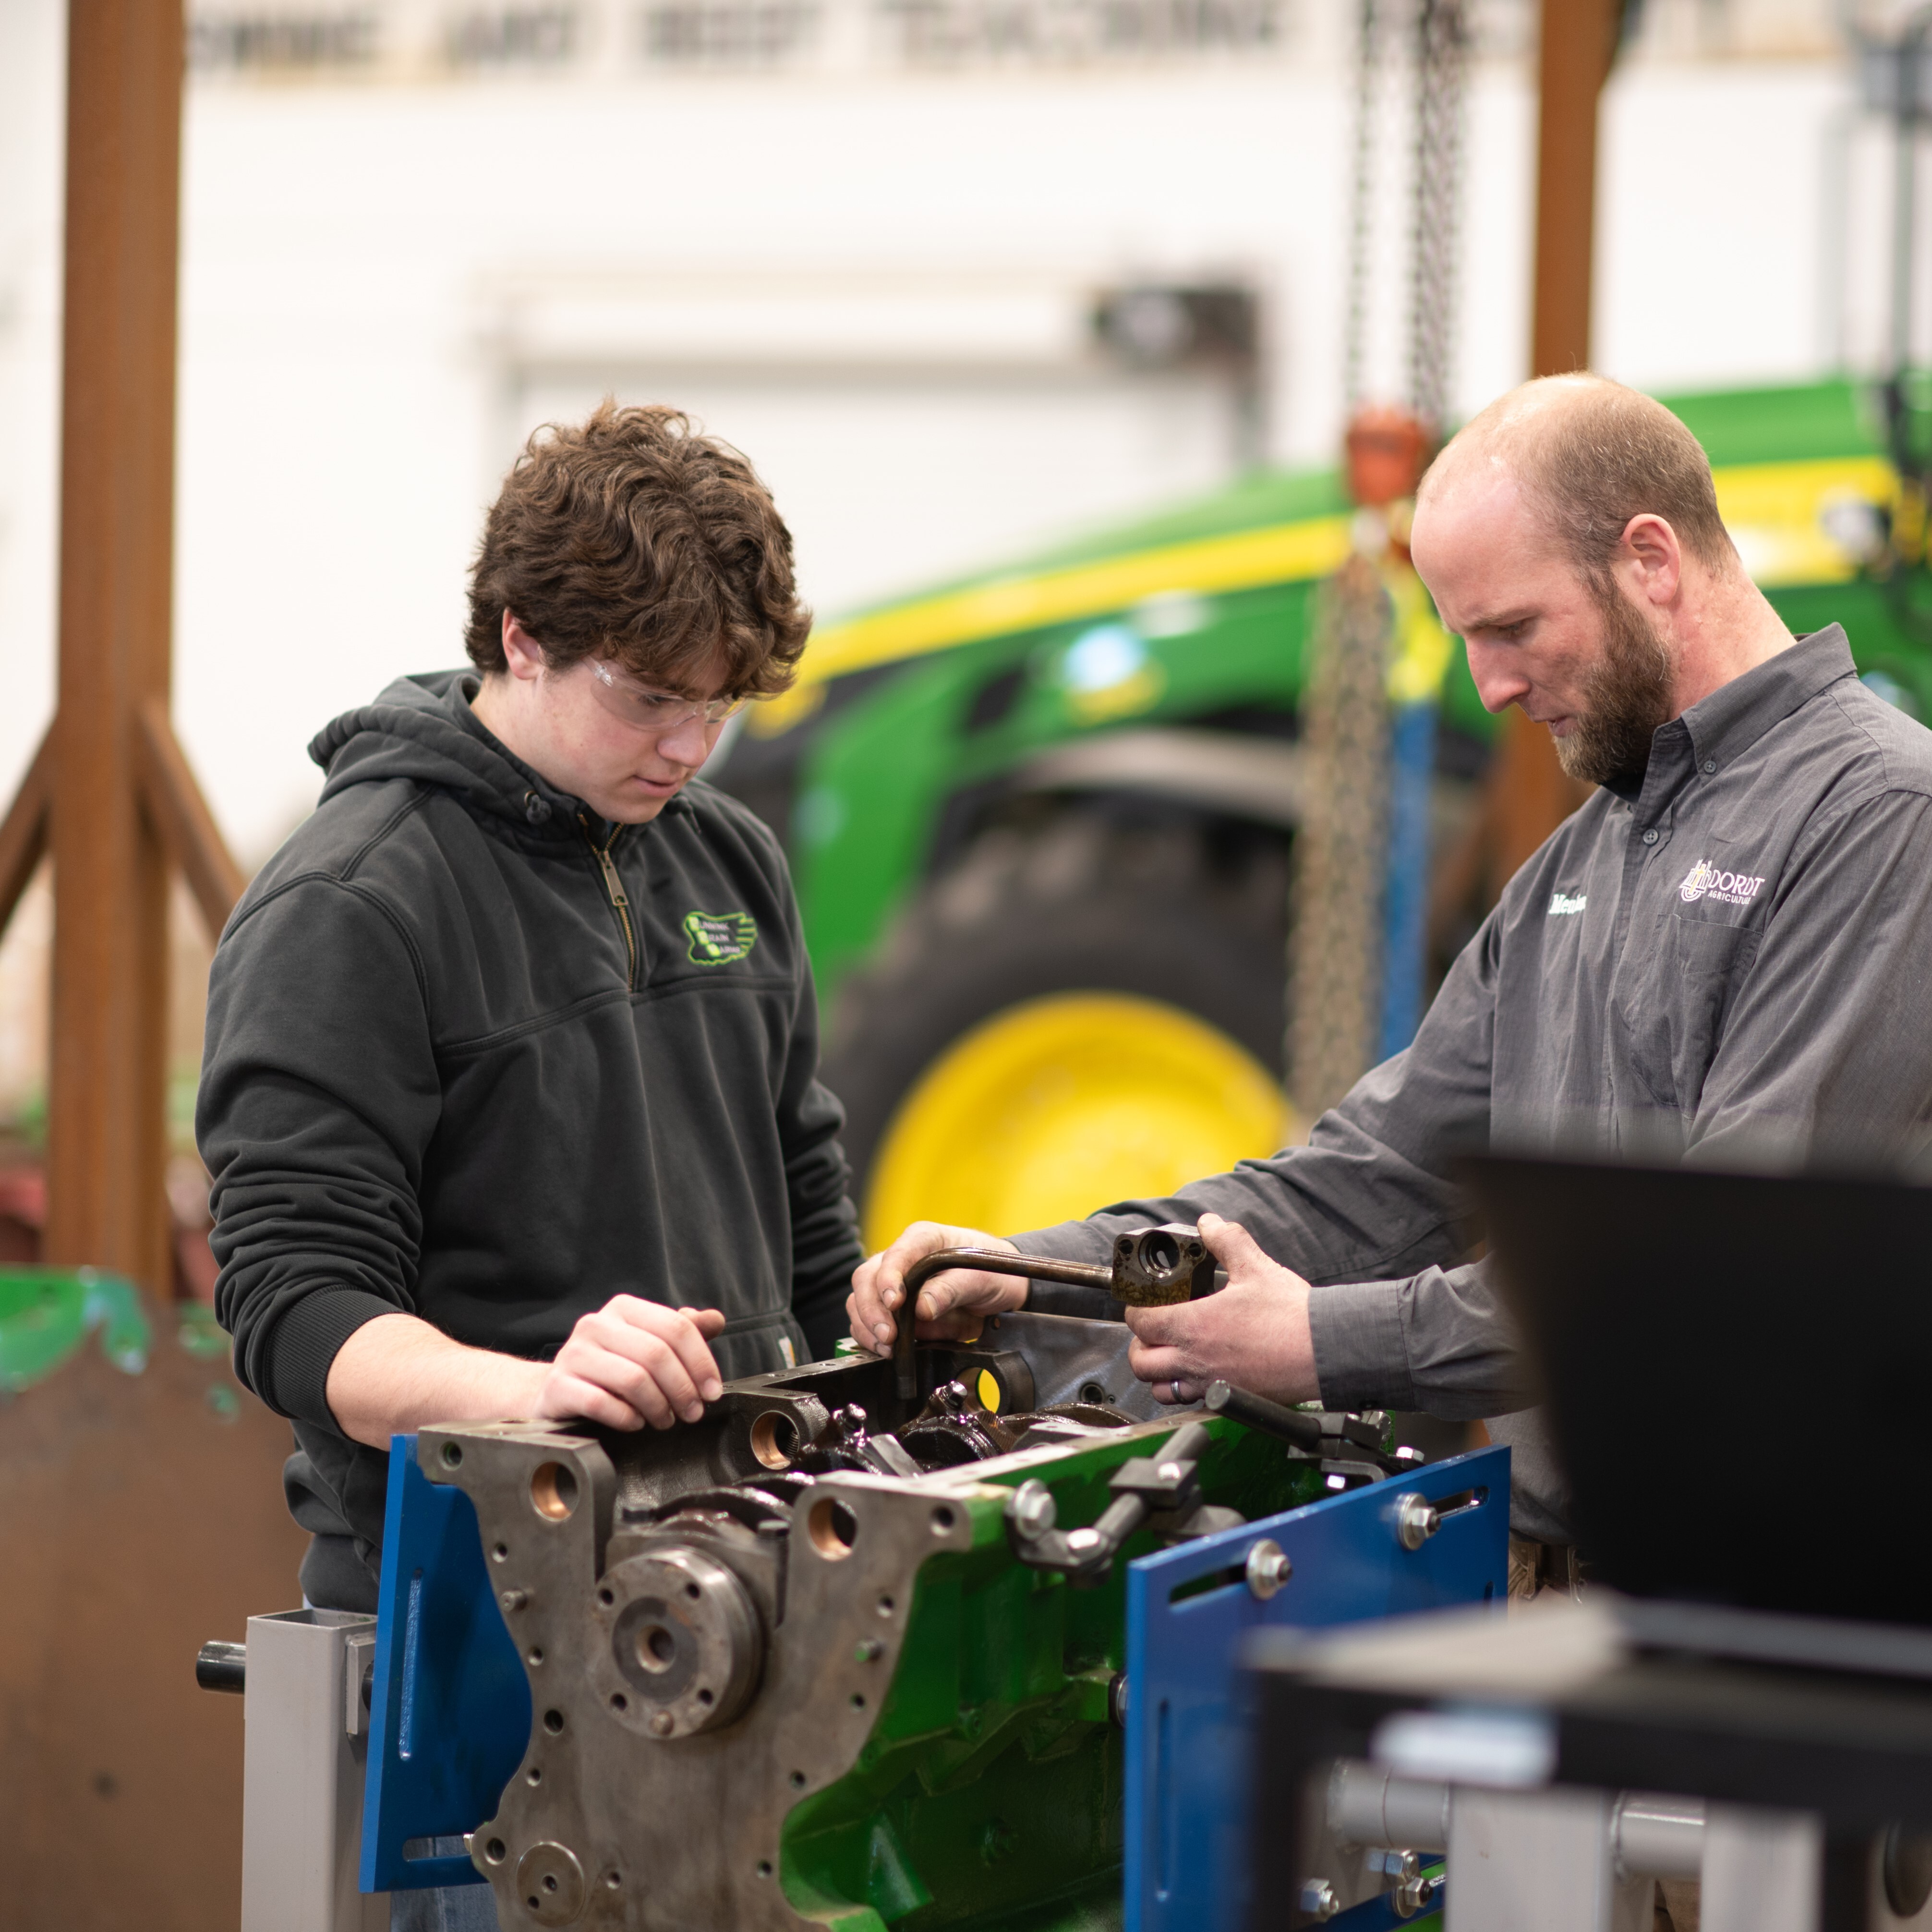 Male student working on tractor parts with teacher's assistance